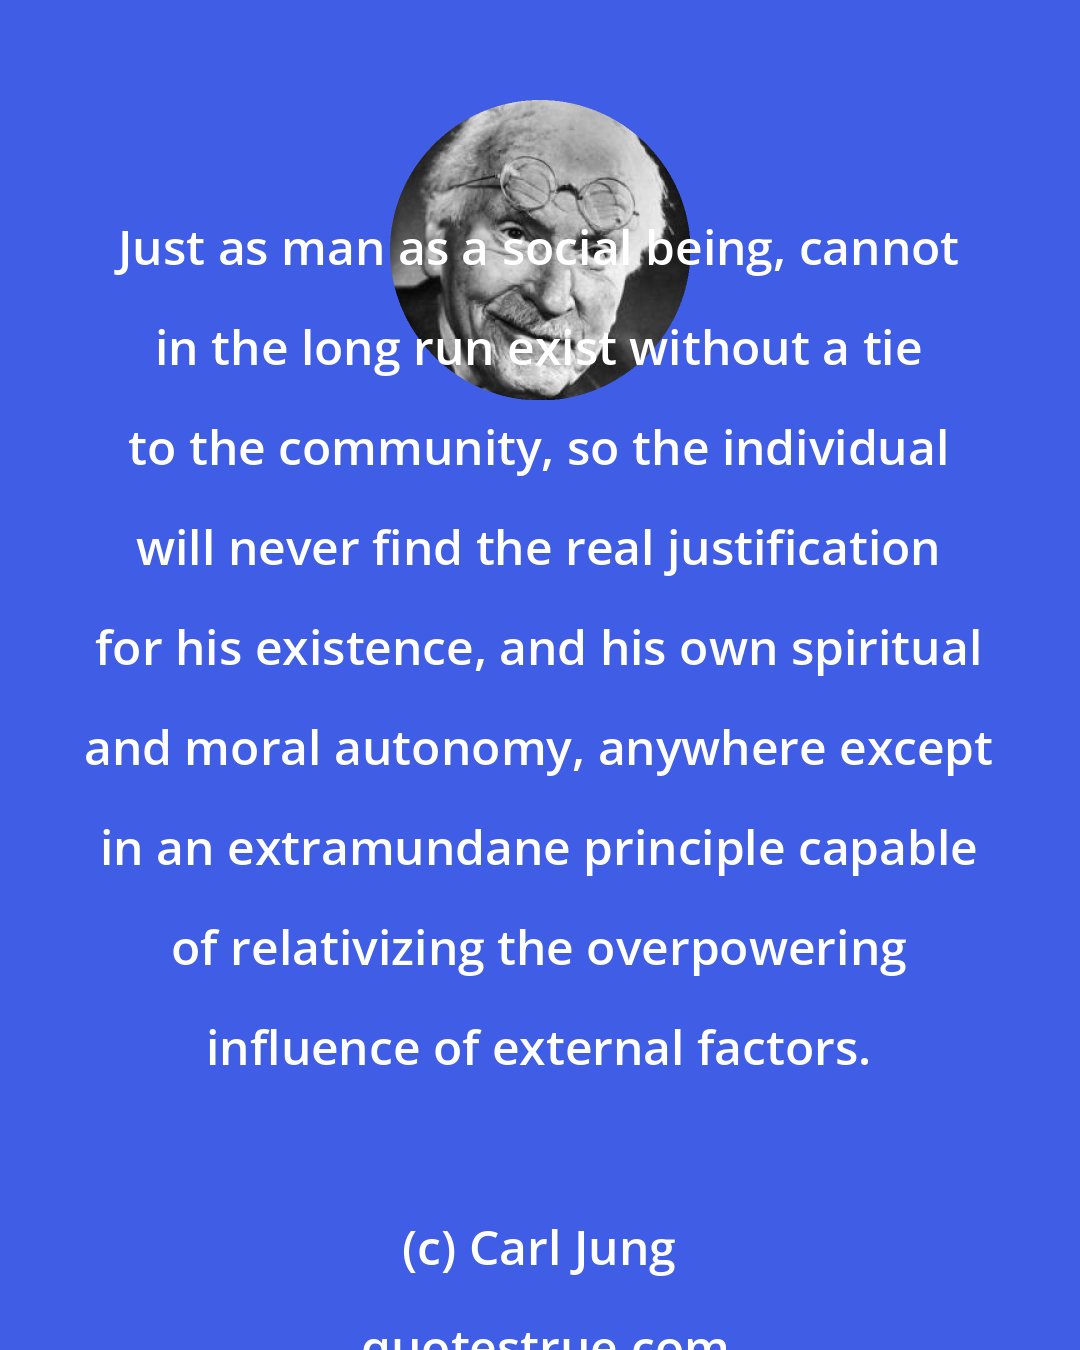 Carl Jung: Just as man as a social being, cannot in the long run exist without a tie to the community, so the individual will never find the real justification for his existence, and his own spiritual and moral autonomy, anywhere except in an extramundane principle capable of relativizing the overpowering influence of external factors.